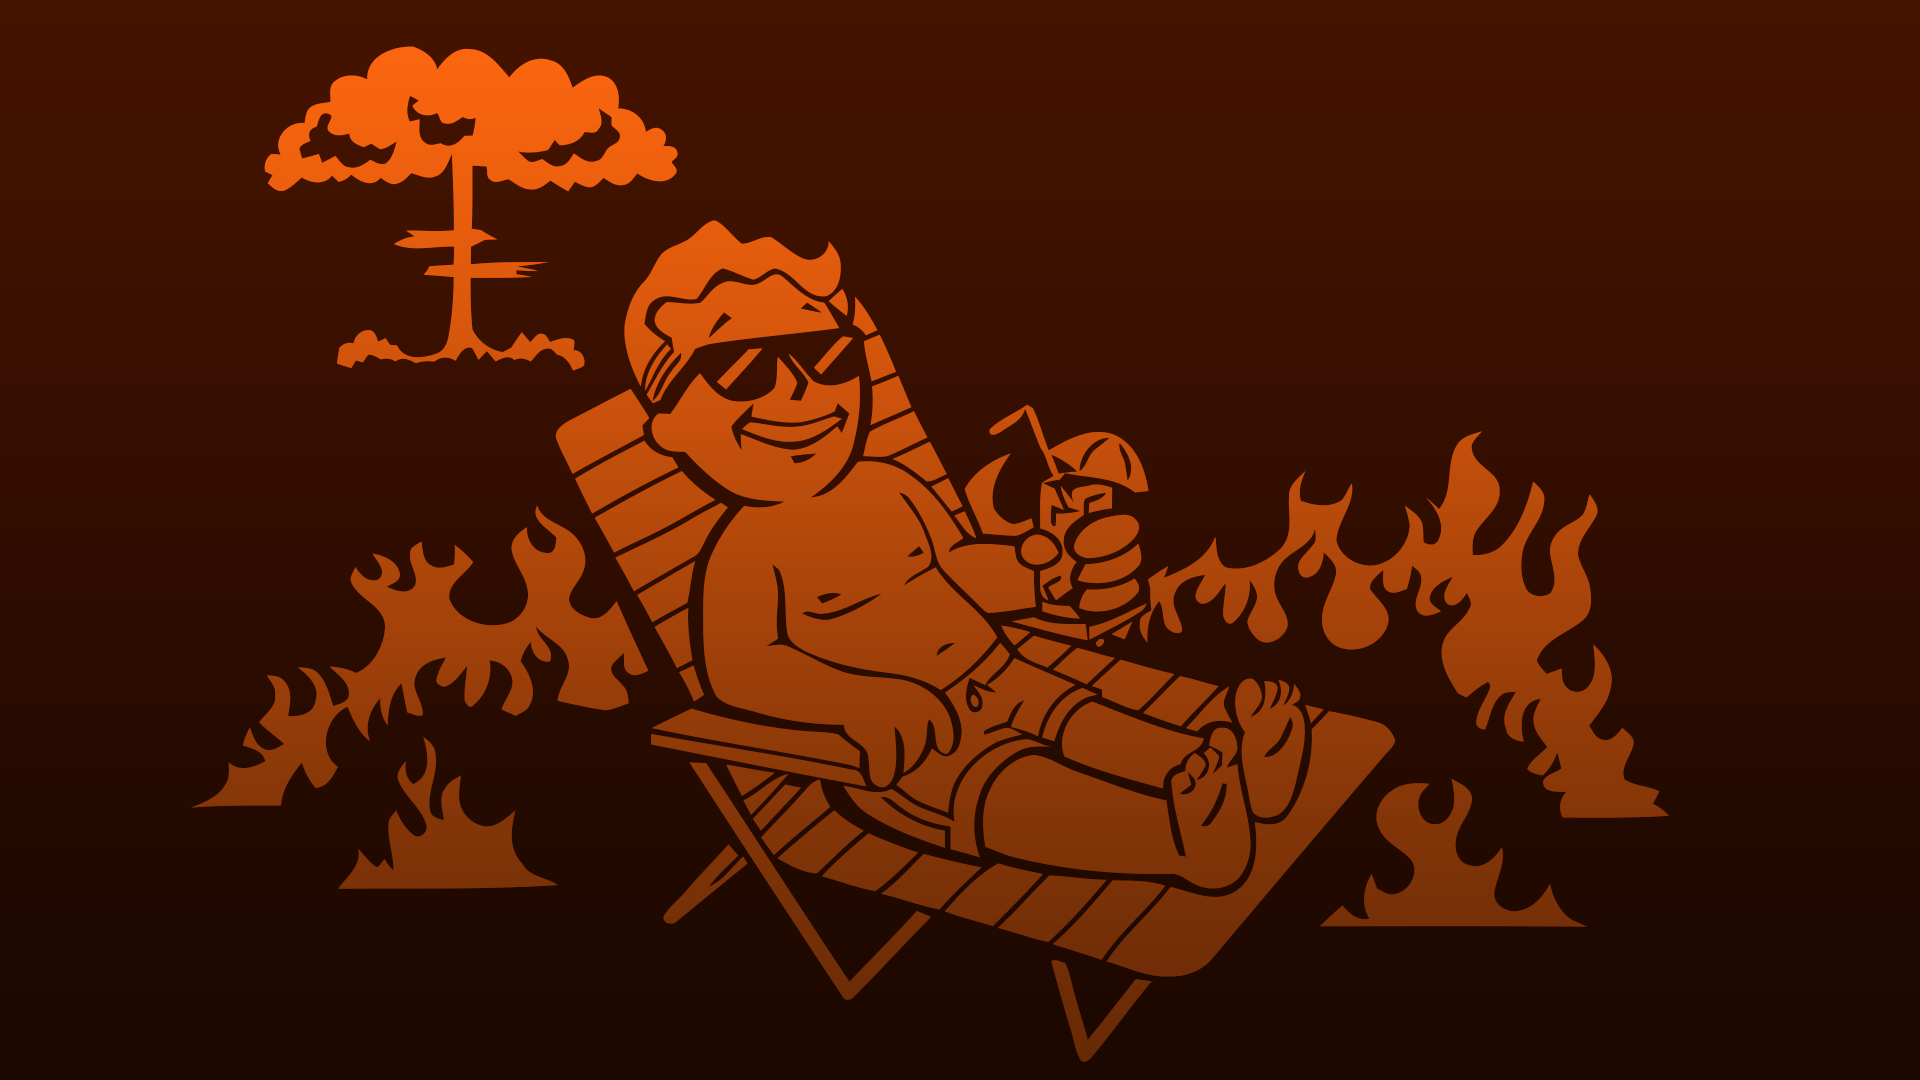 General 1920x1080 Fallout video games deck chairs Vault Boy PC gaming humor artwork science fiction atomic bomb